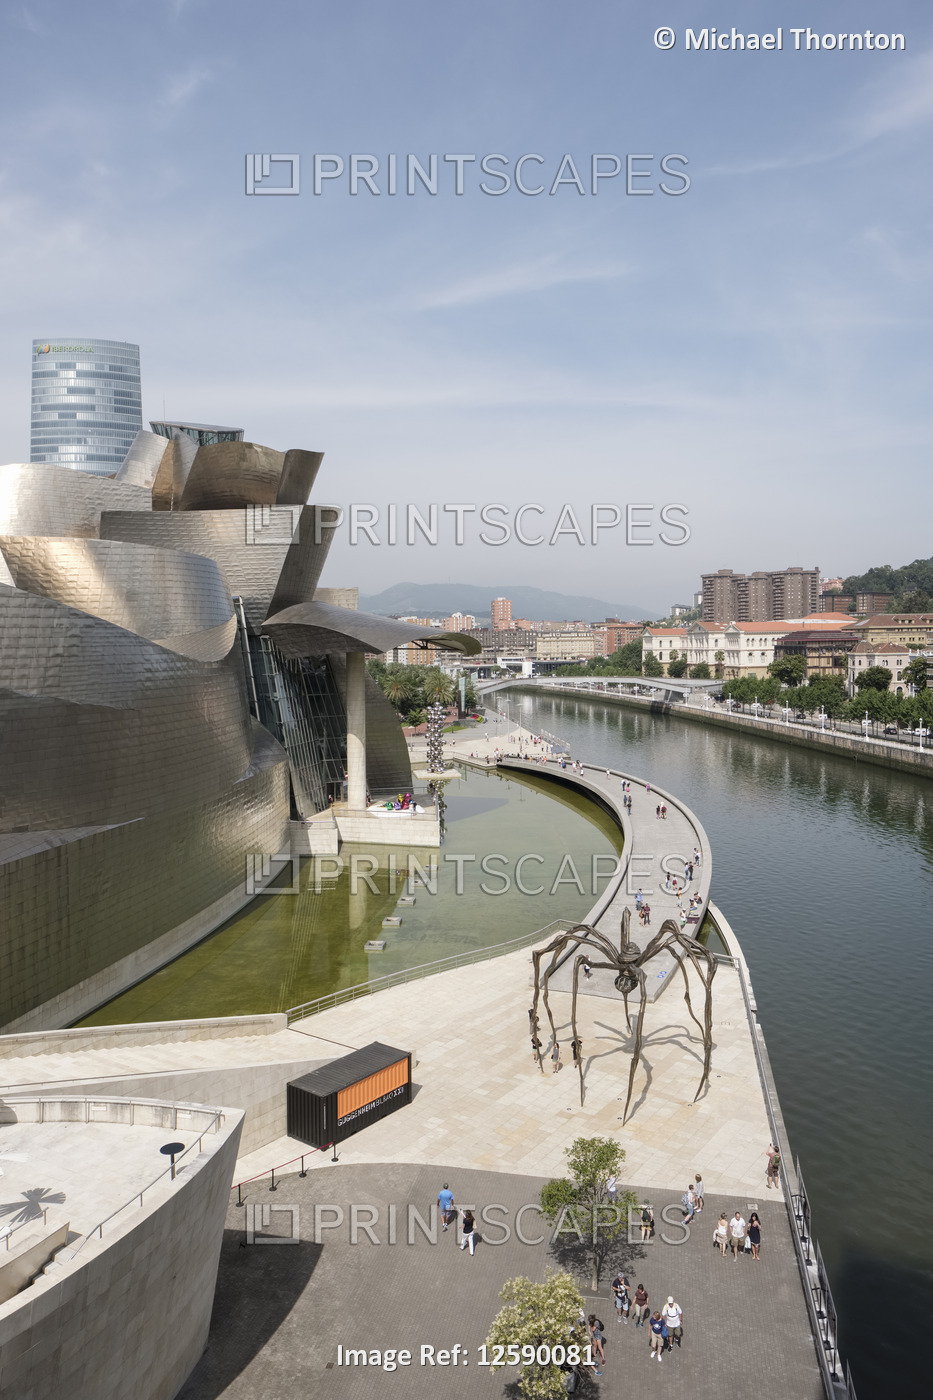 Guggenheim Musuem with Iberdrola Tower in background, Maman the giant spider in ...